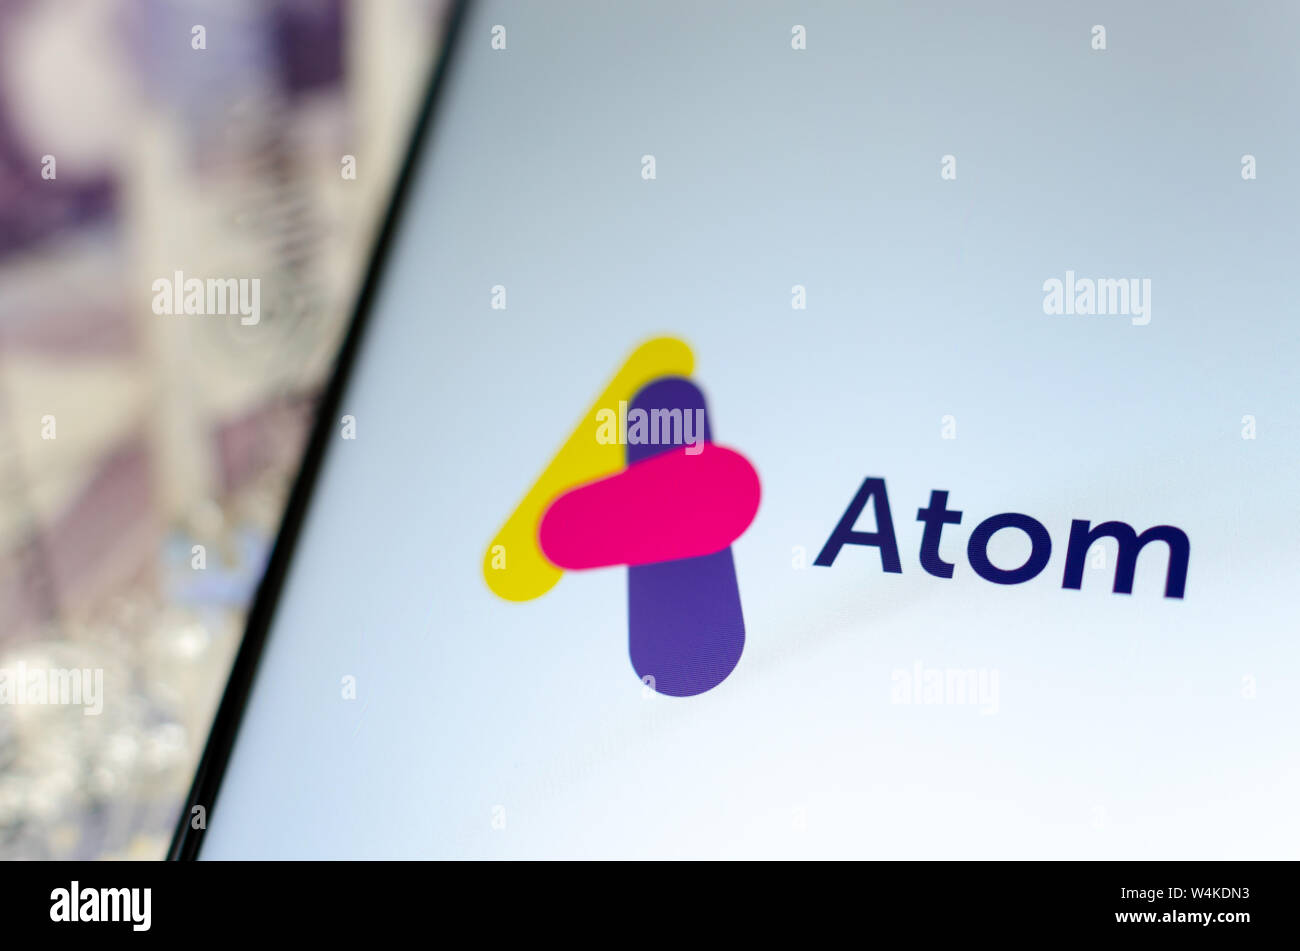 Atom bank app on the smartphone screen. Close up photo. Stock Photo